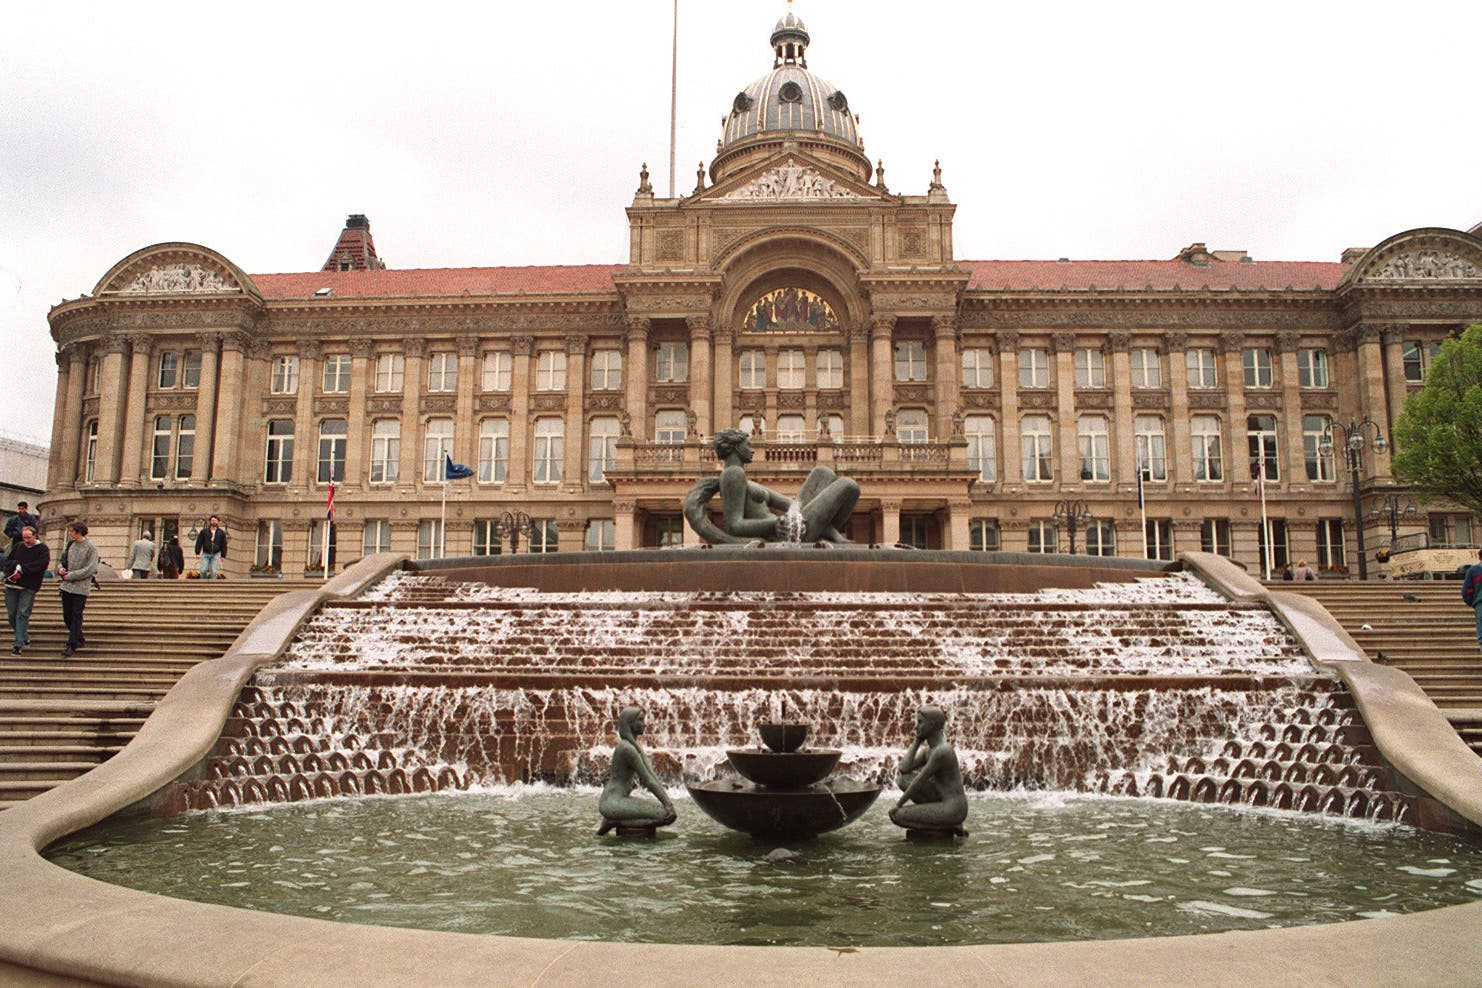 Birmingham City Council has said it does not have the money to pay the bill (Phil Addis/PA)